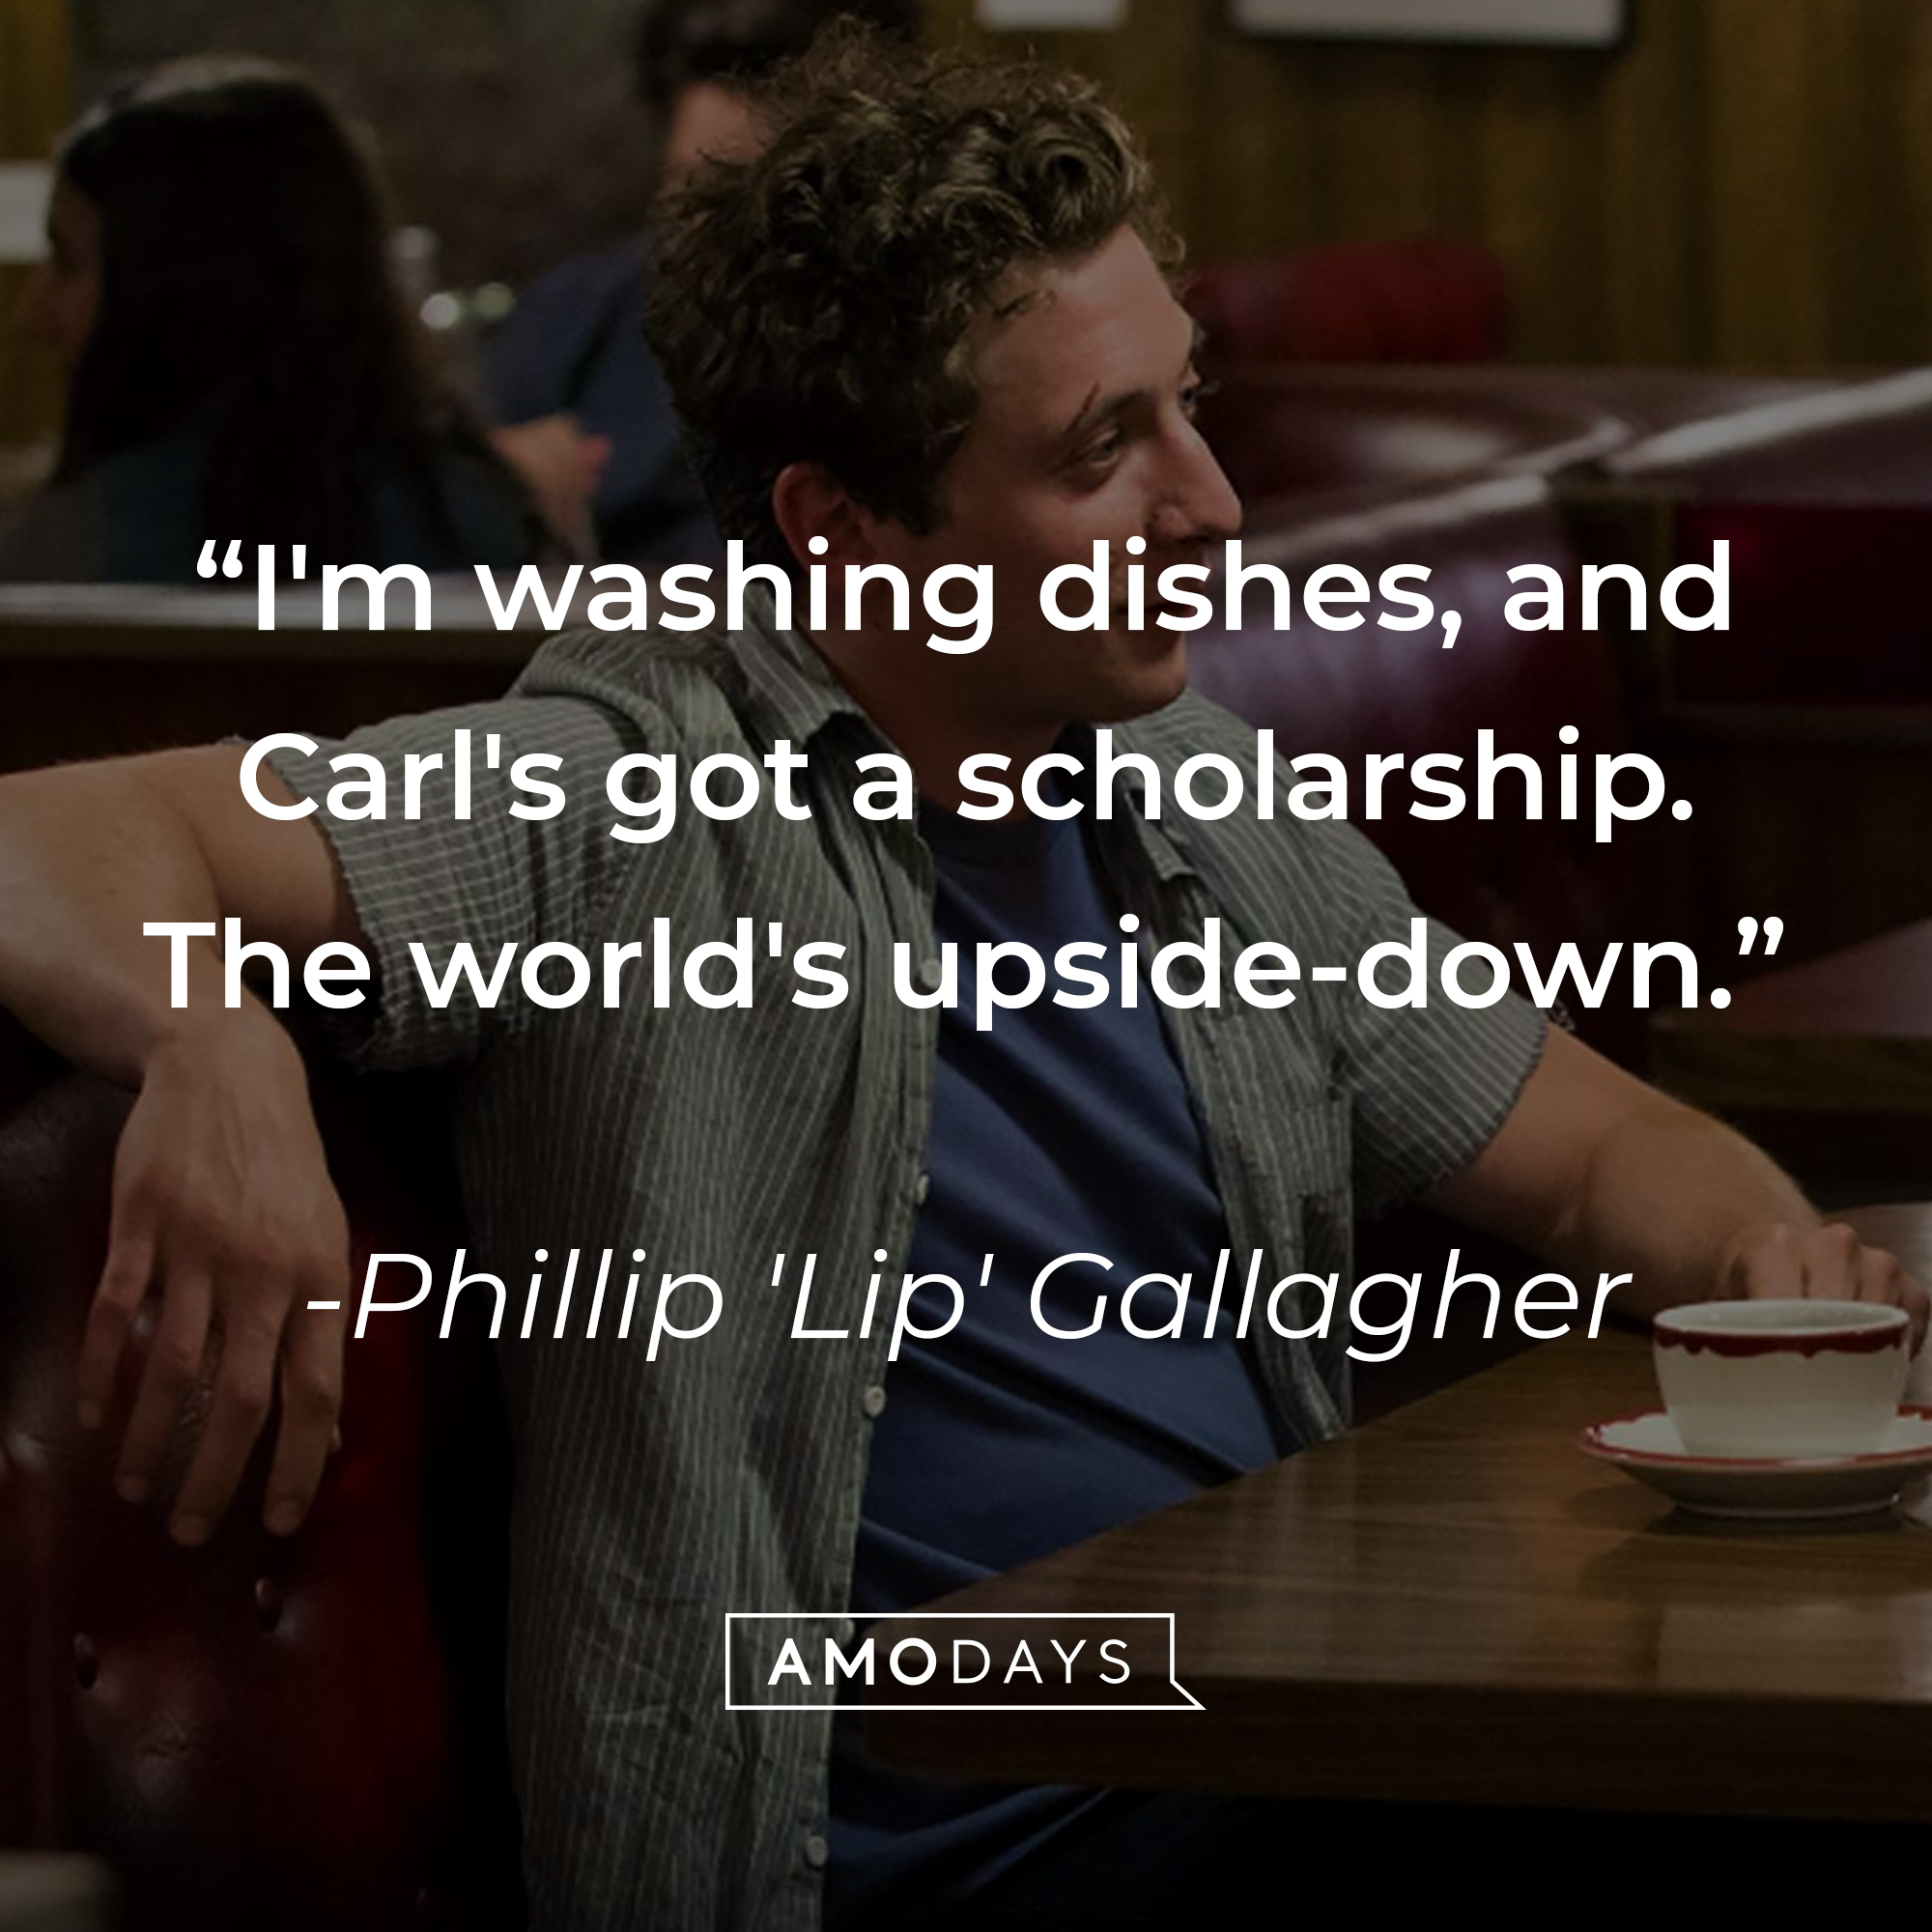 Phillip 'Lip' Gallagher with his quote: “I'm washing dishes, and Carl's got a scholarship. The world's upside-down.” | Source: facebook.com/ShamelessOnShowtime